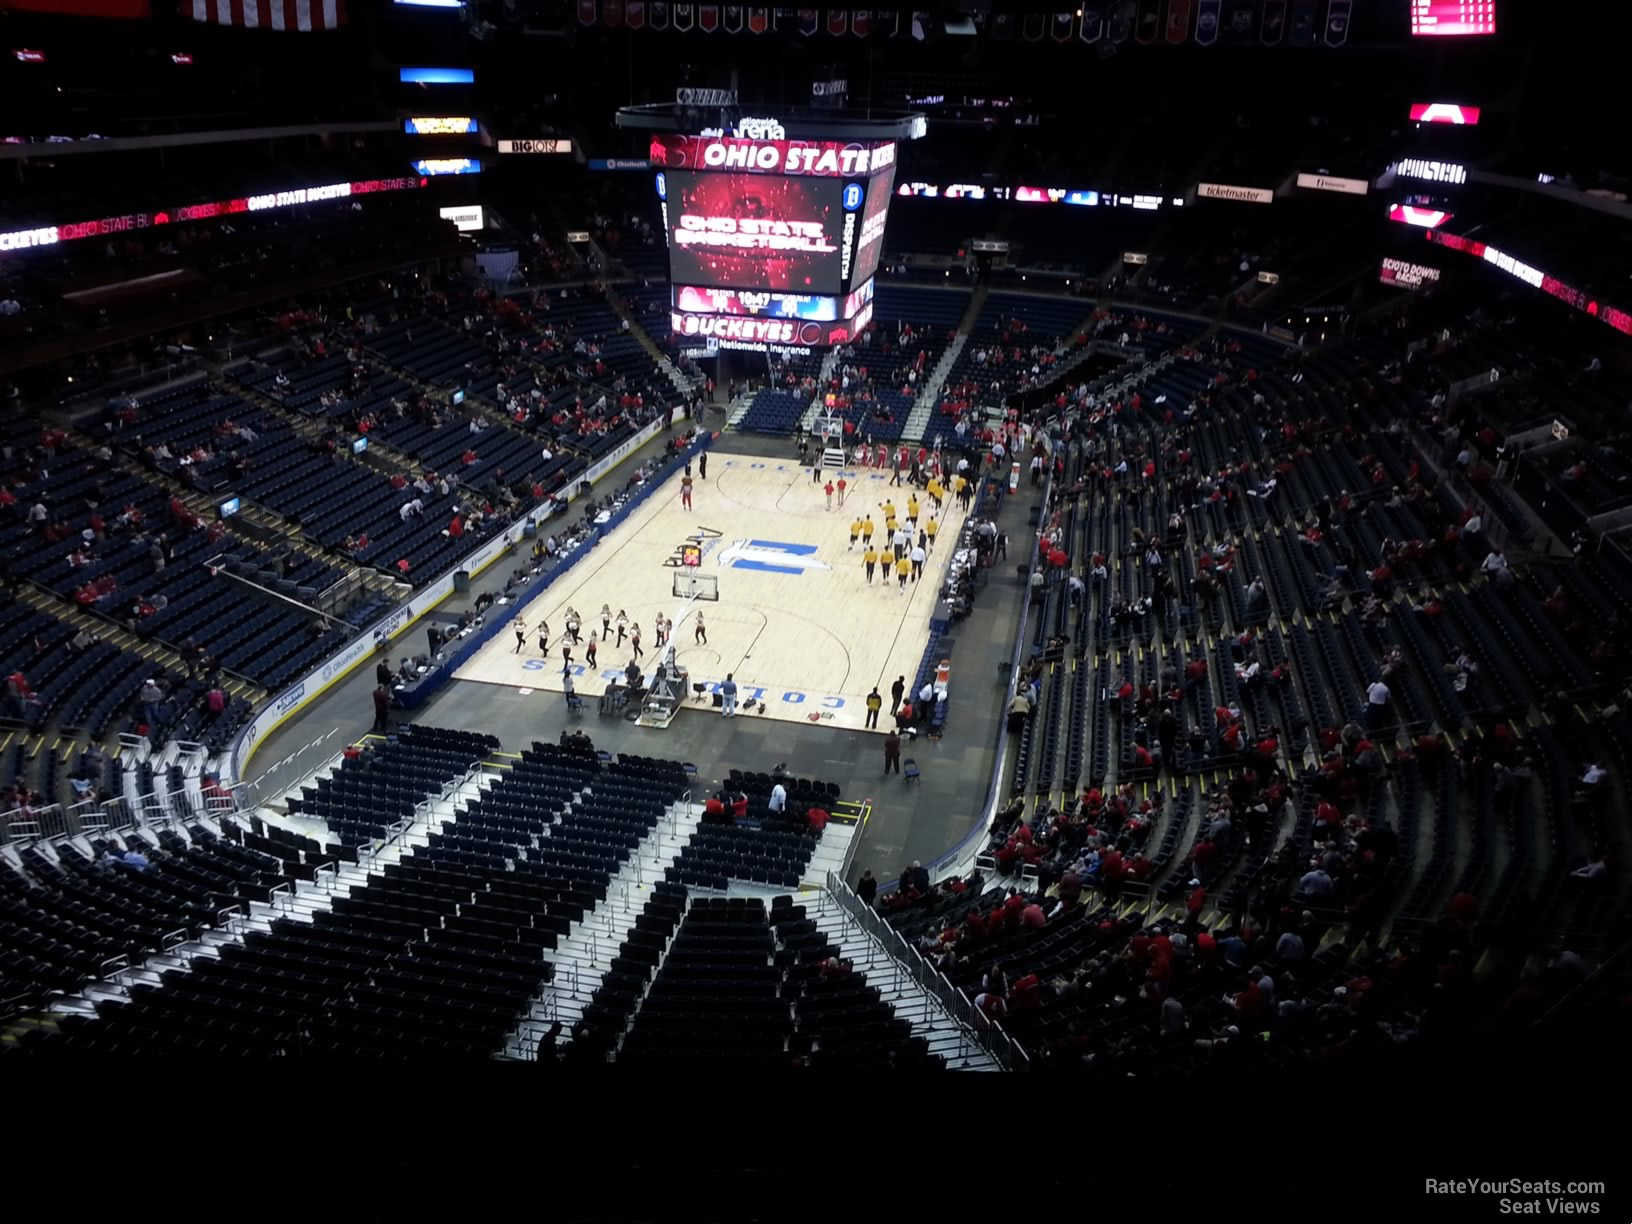 section 209, row g seat view  for basketball - nationwide arena